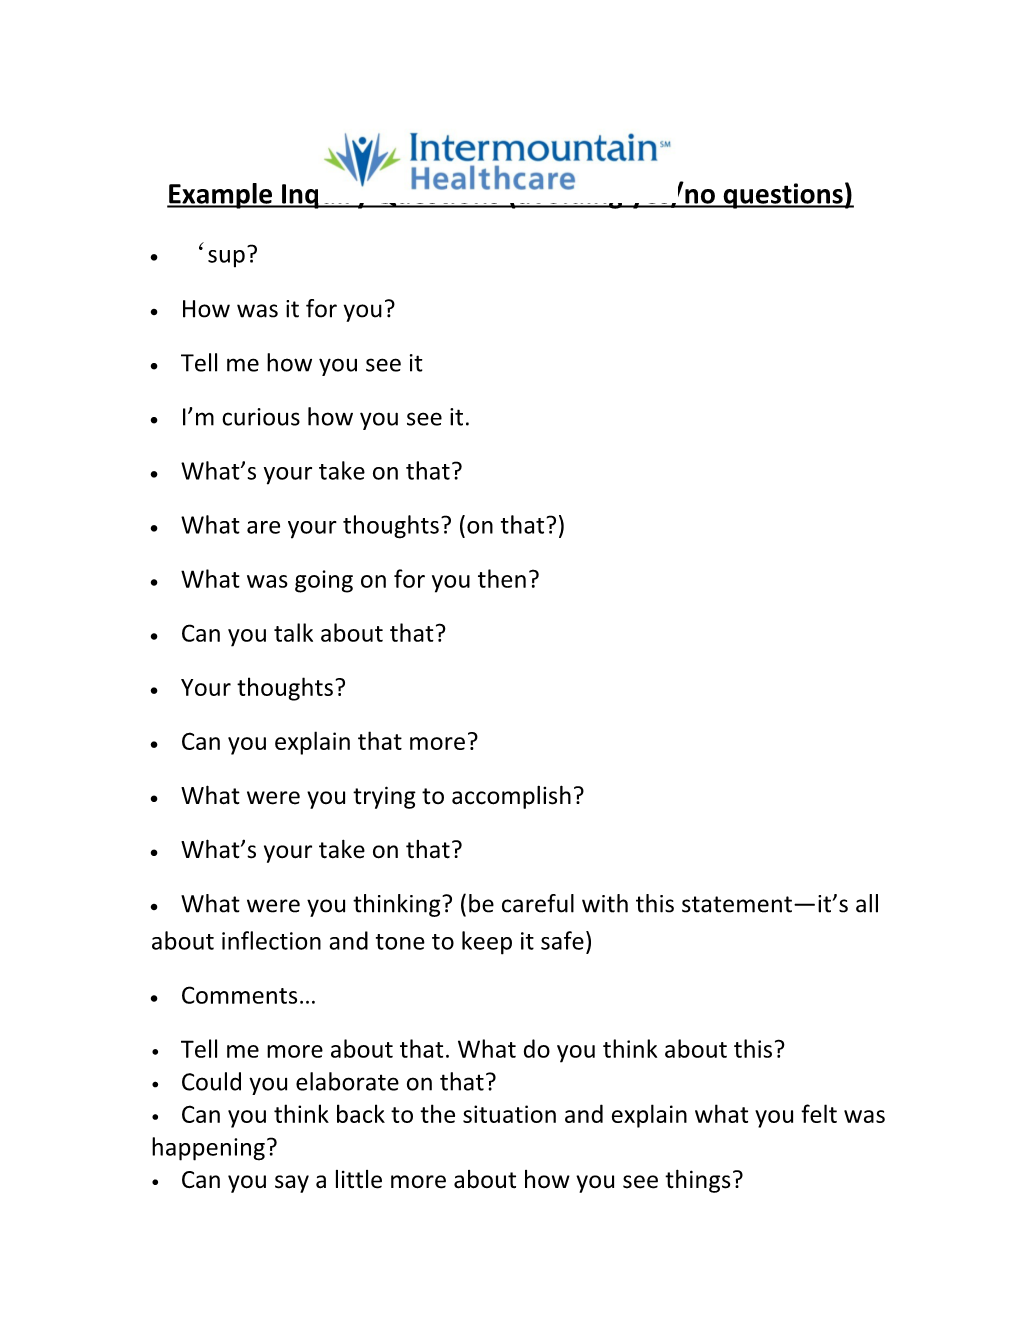 Example Inquiry Questions (Avoiding Yes/No Questions)